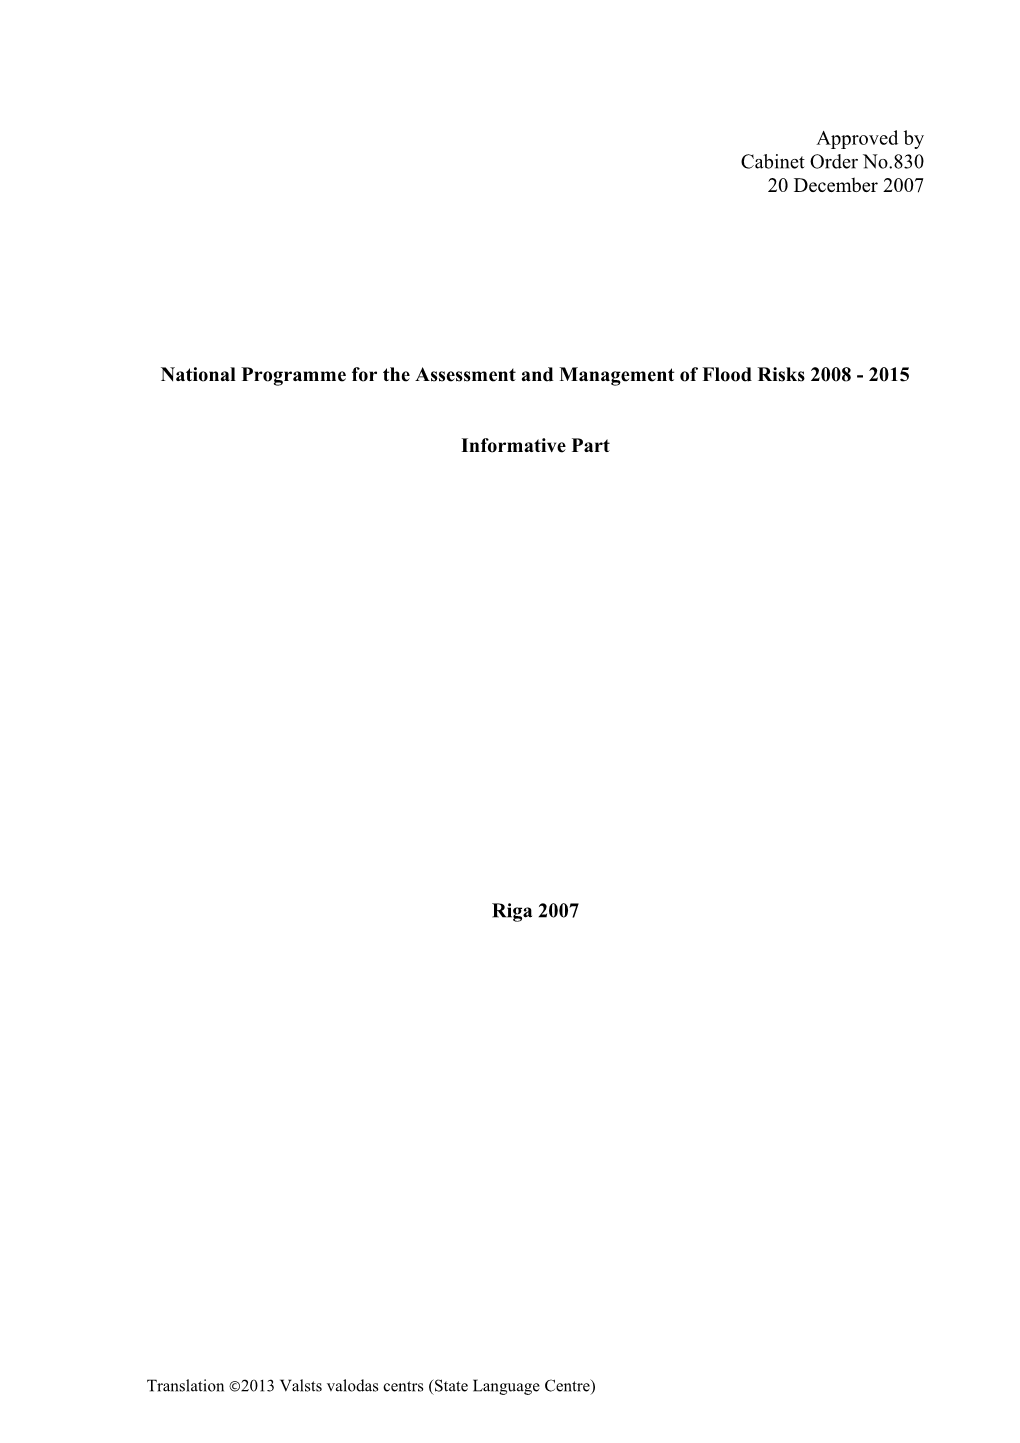 National Programme for the Assessment and Management of Flood Risks 2008 - 2015